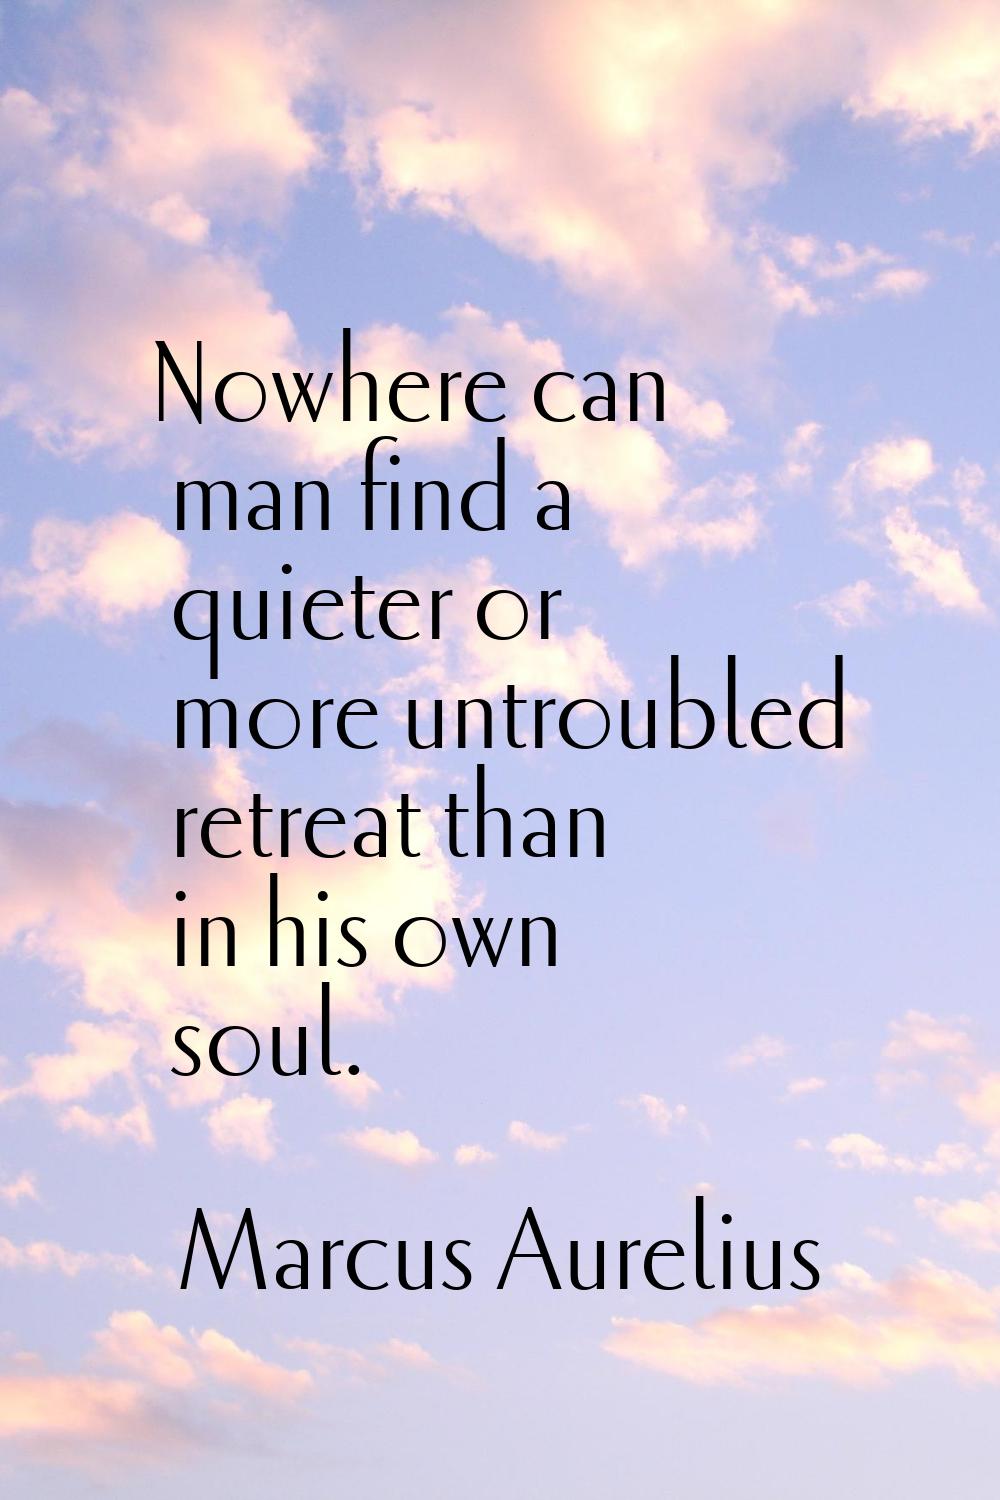 Nowhere can man find a quieter or more untroubled retreat than in his own soul.